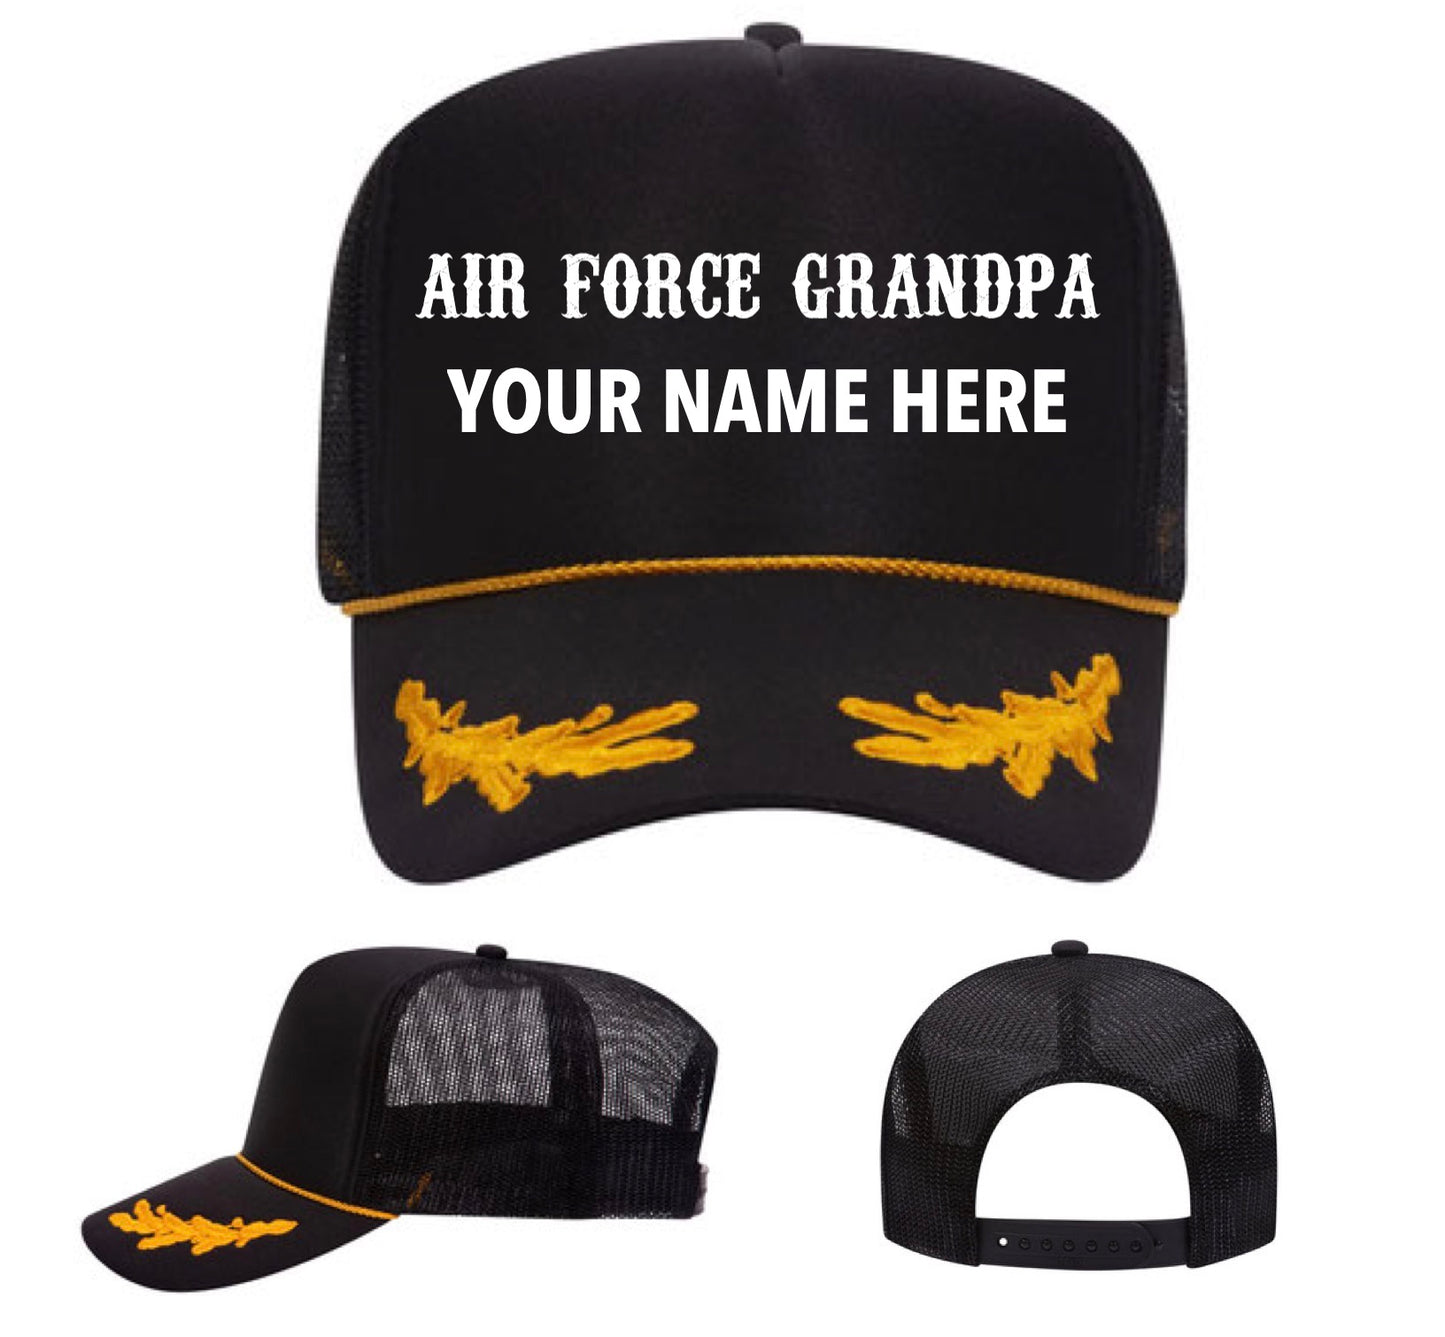 Customized Military Hat (FREE Shipping)